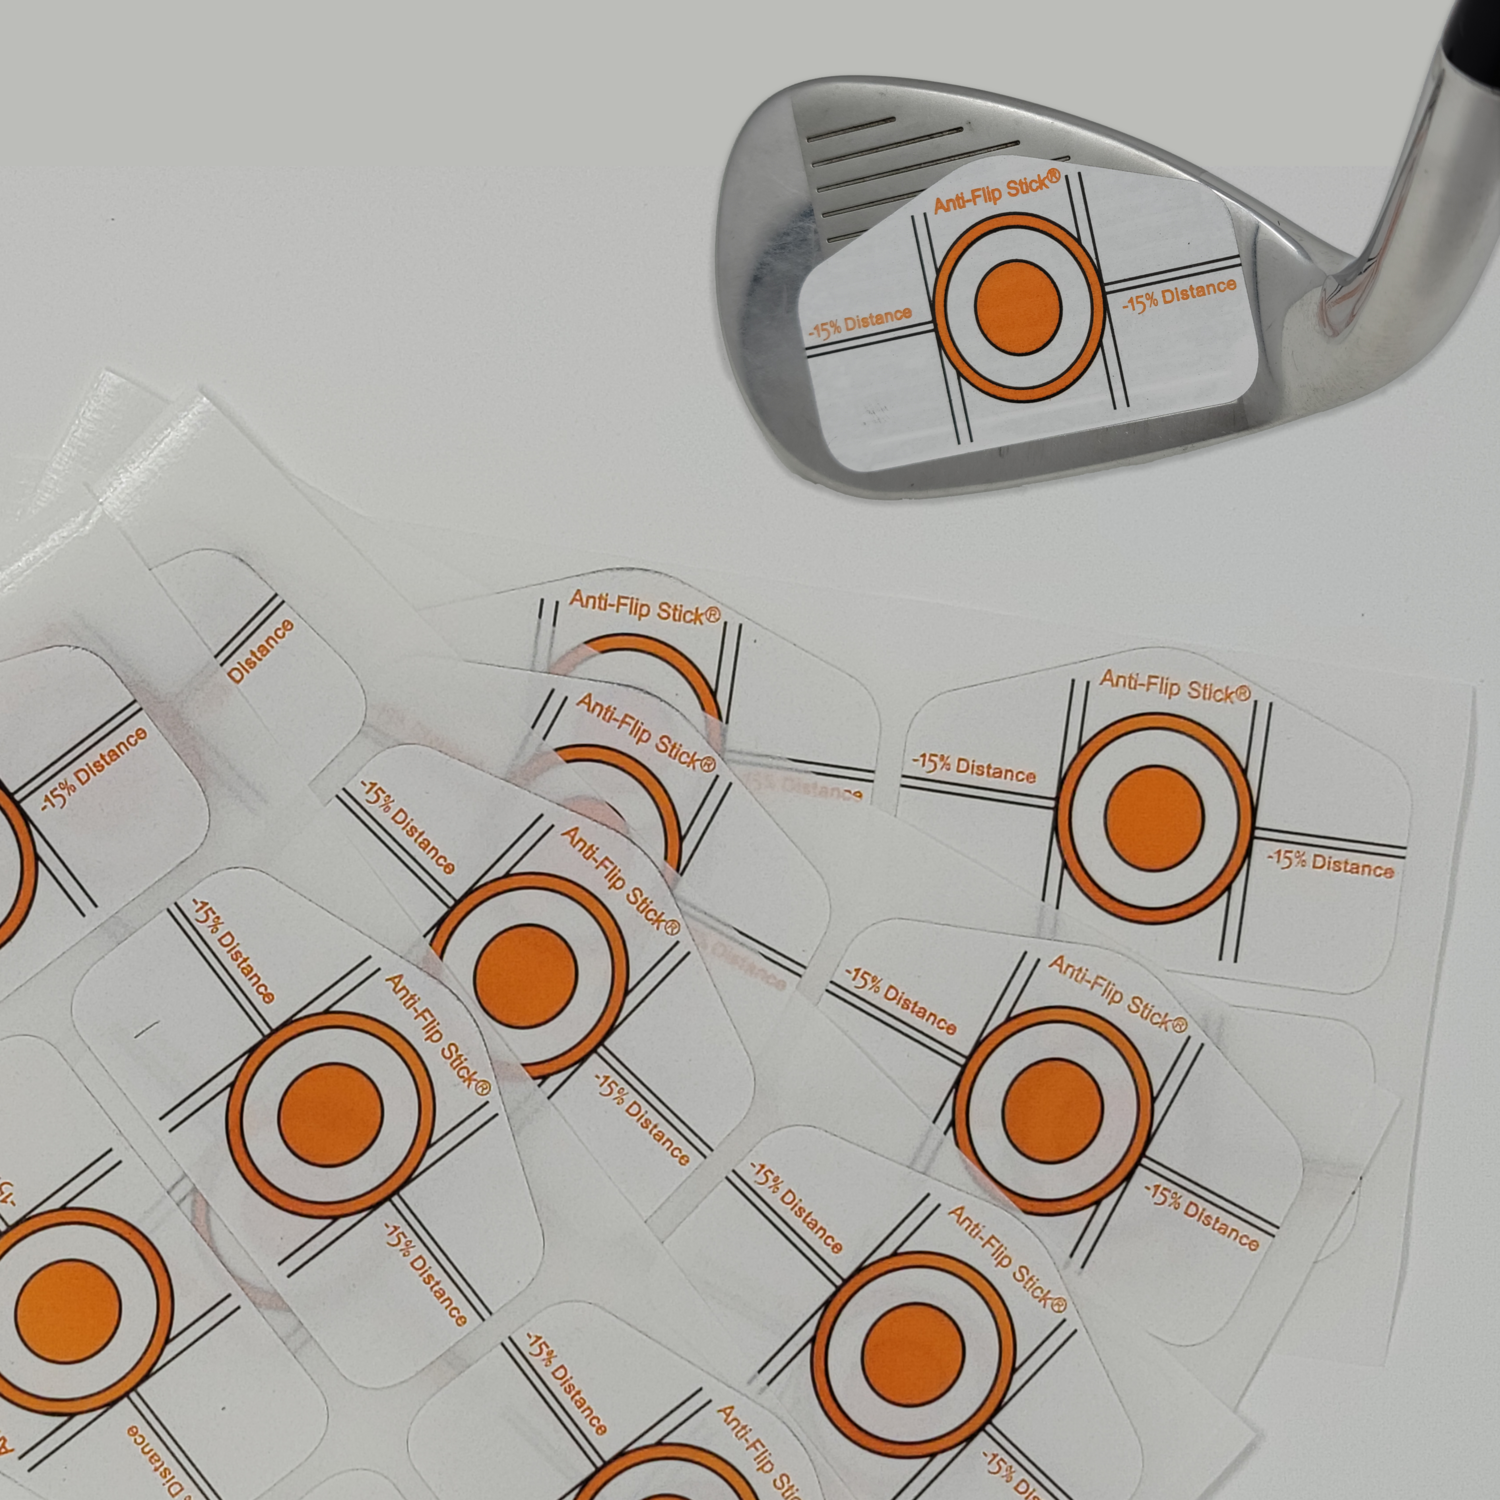 Golf Impact Tape Labels. Golf Club Impact Tape Stickers For Driver, Irons, Or Woods. (200 Labels)